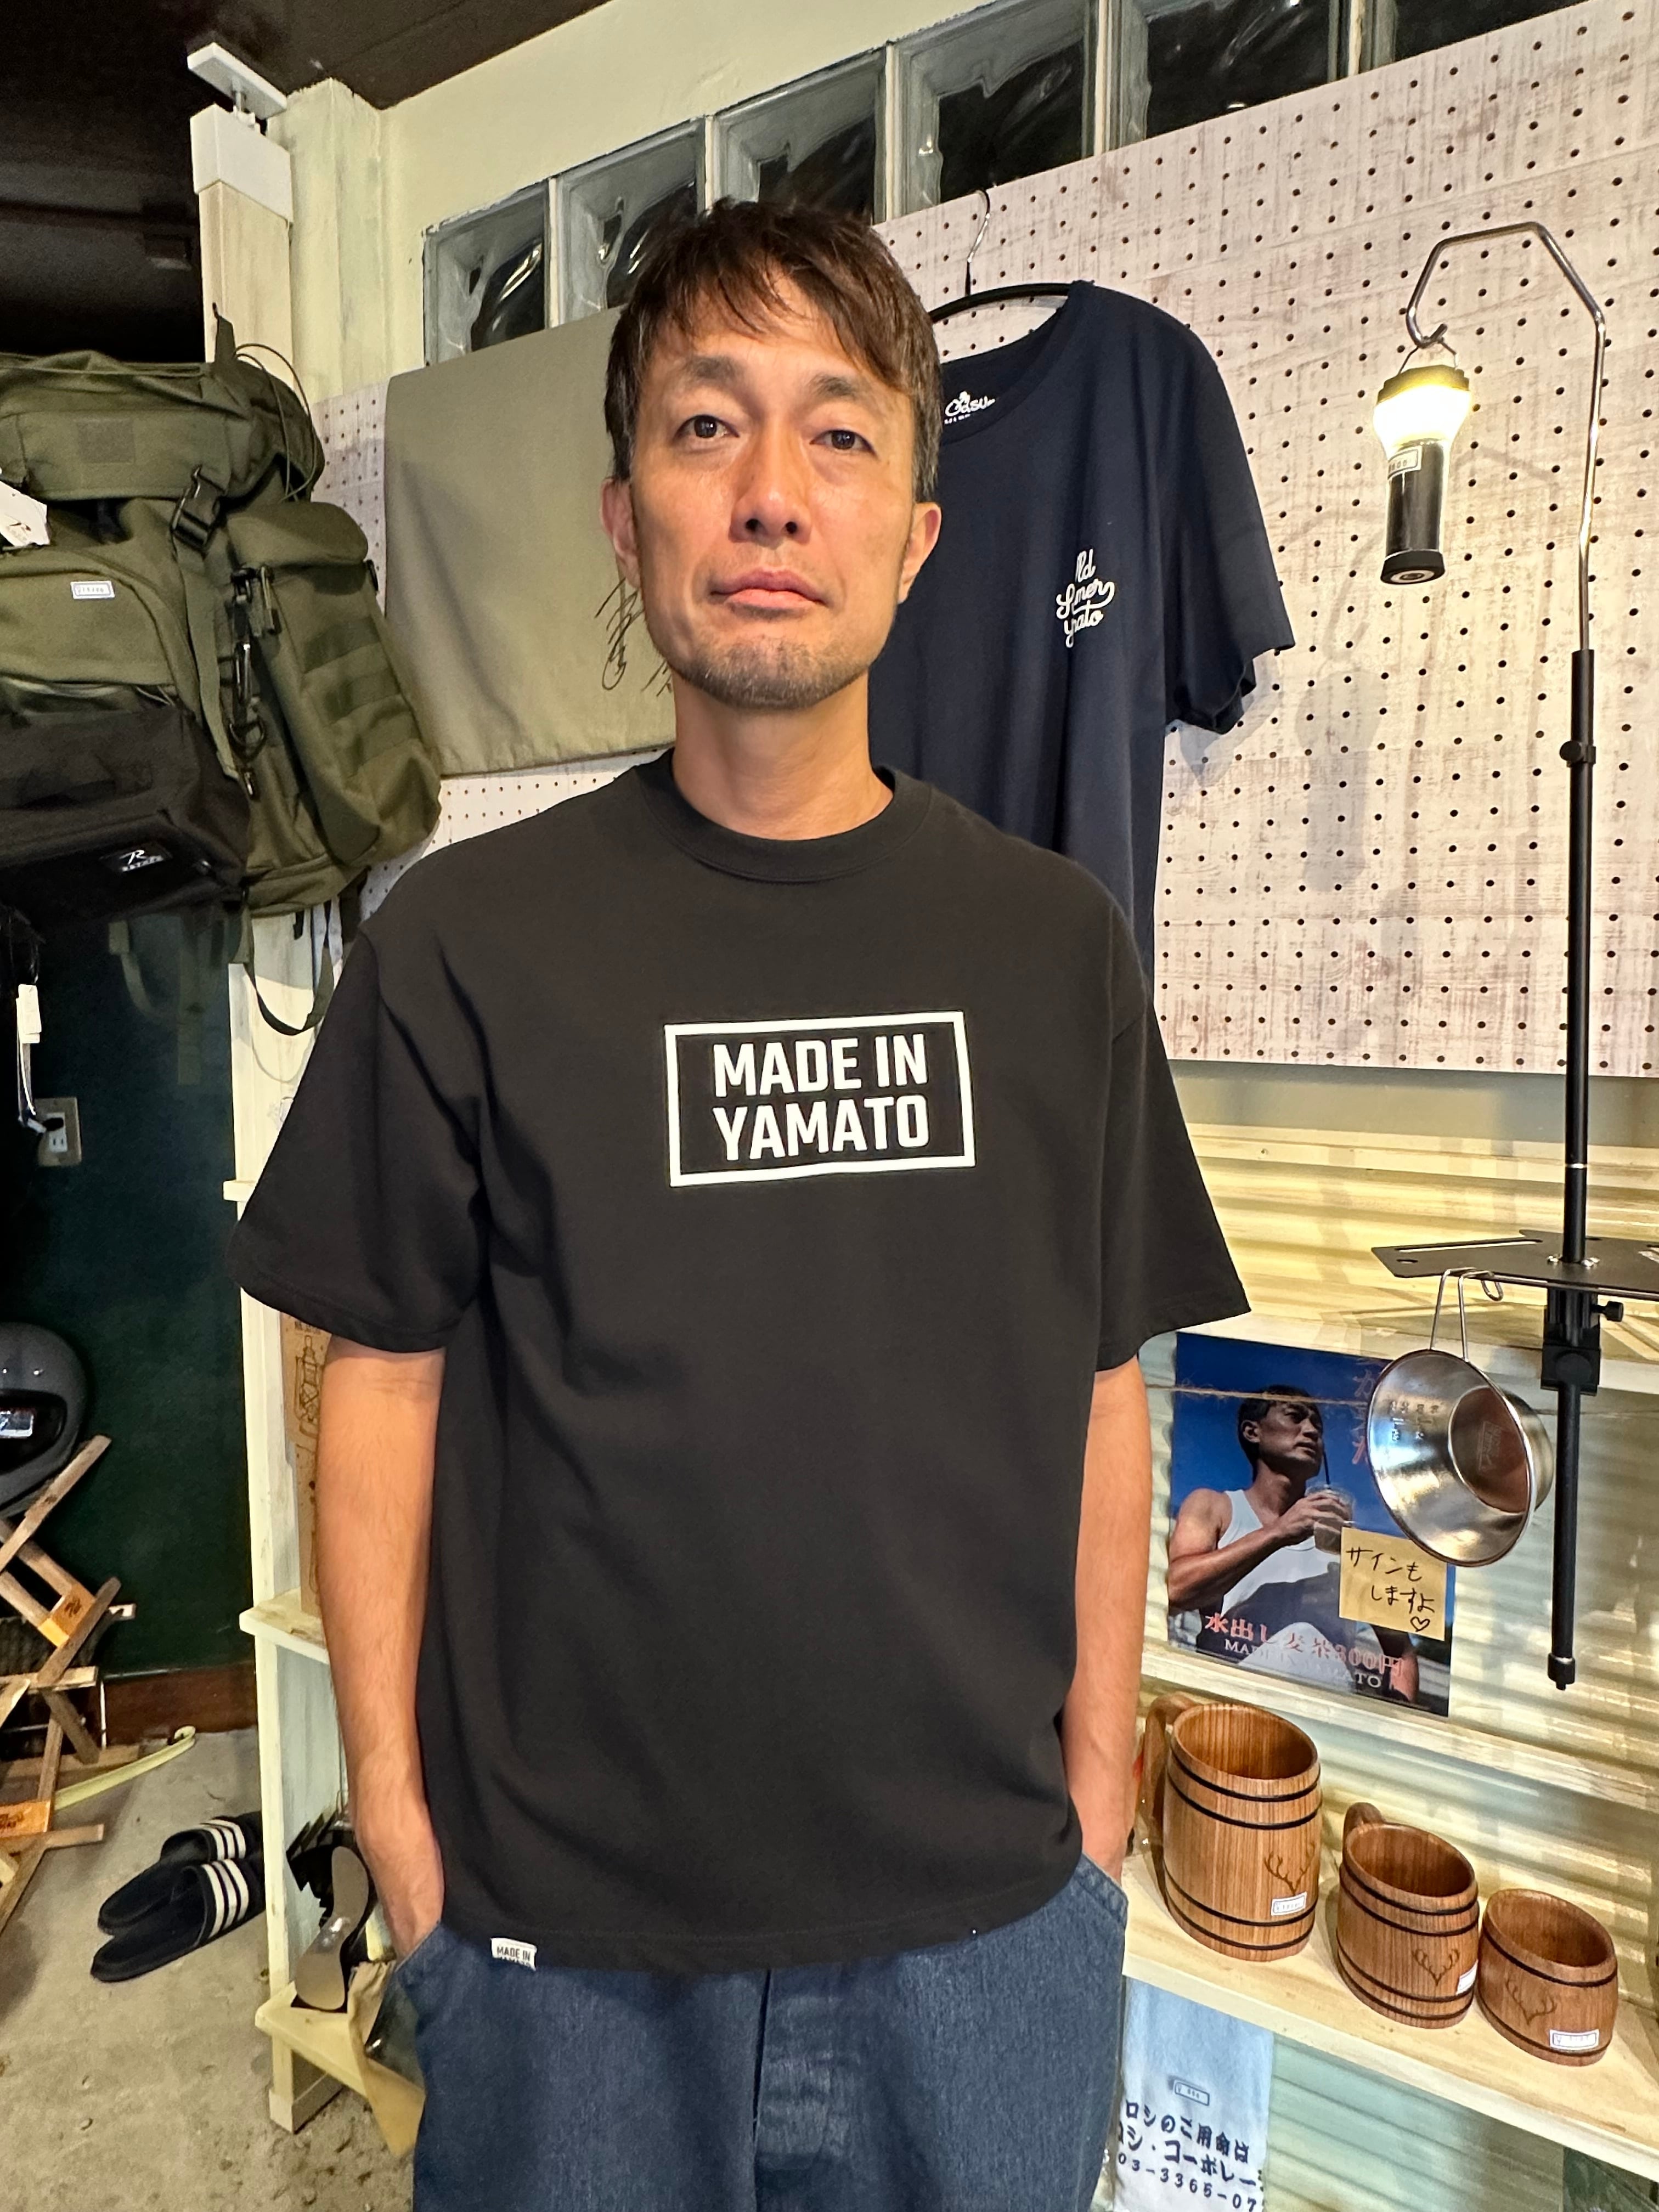 MADE IN YAMATO Tシャツ　スパローズ　大和　焚き火会